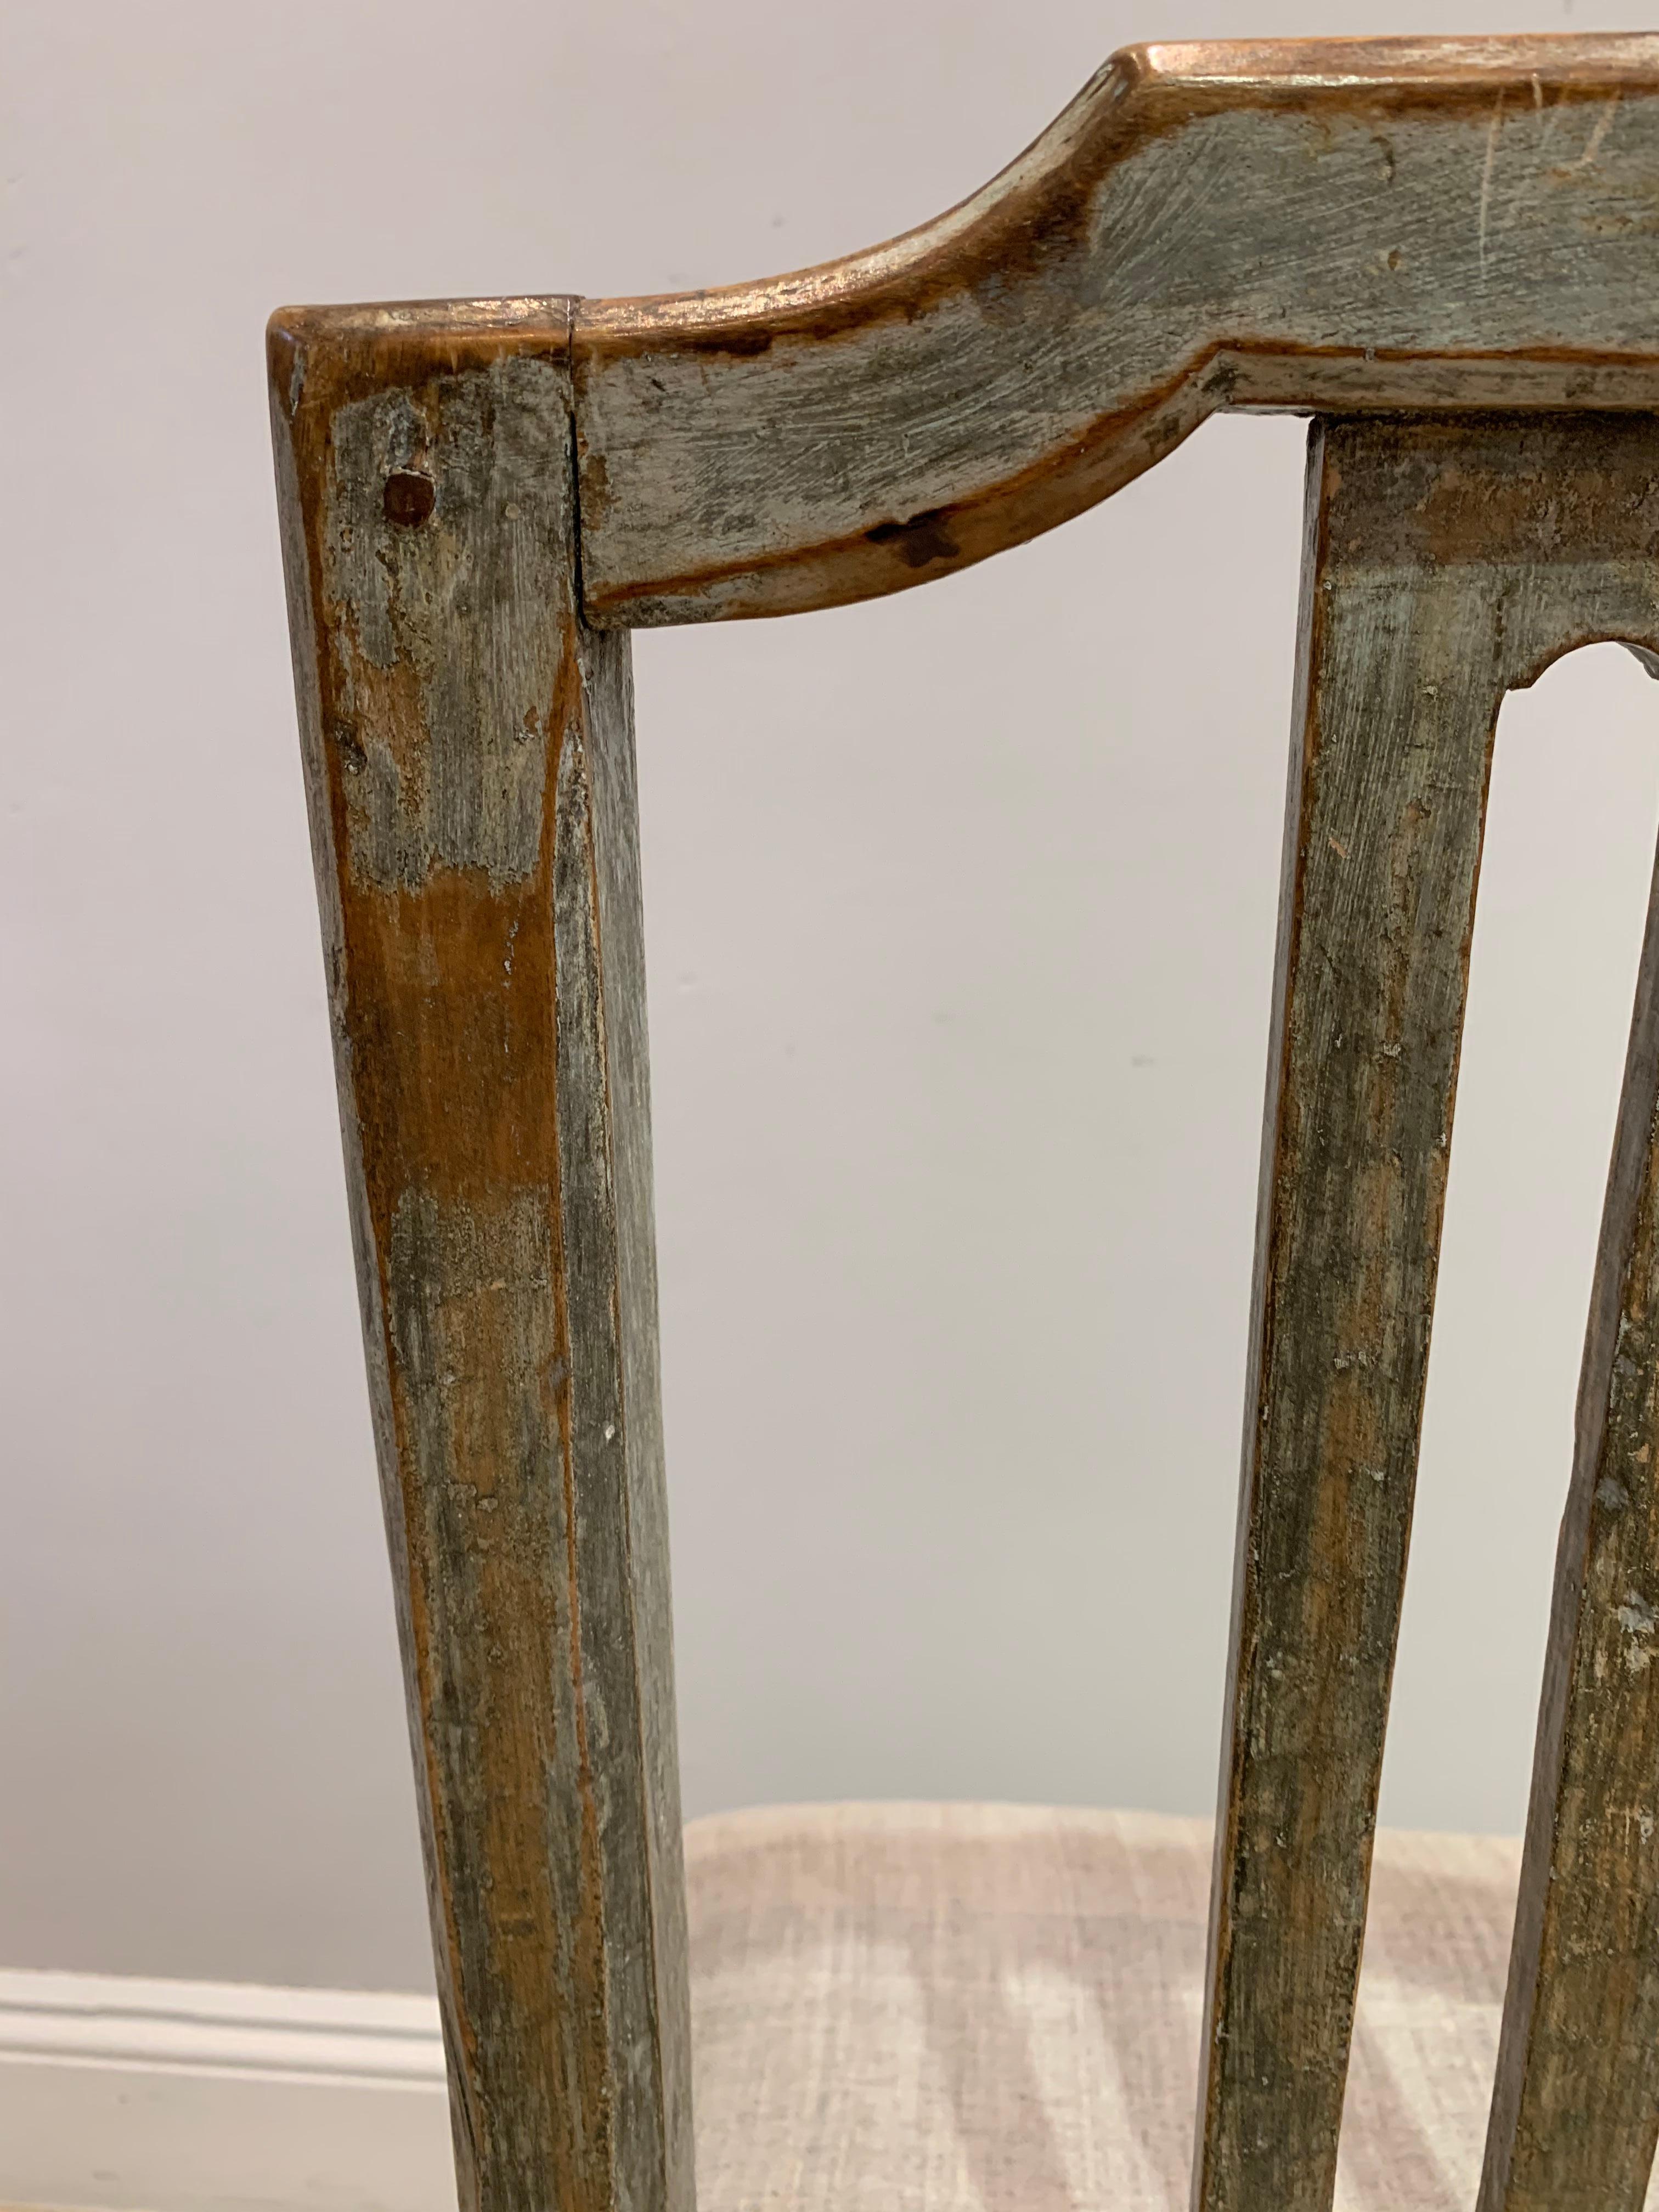 Painted Gustavian Swedish Side Chair with Decorative Flower Carving, circa 1800 For Sale 7